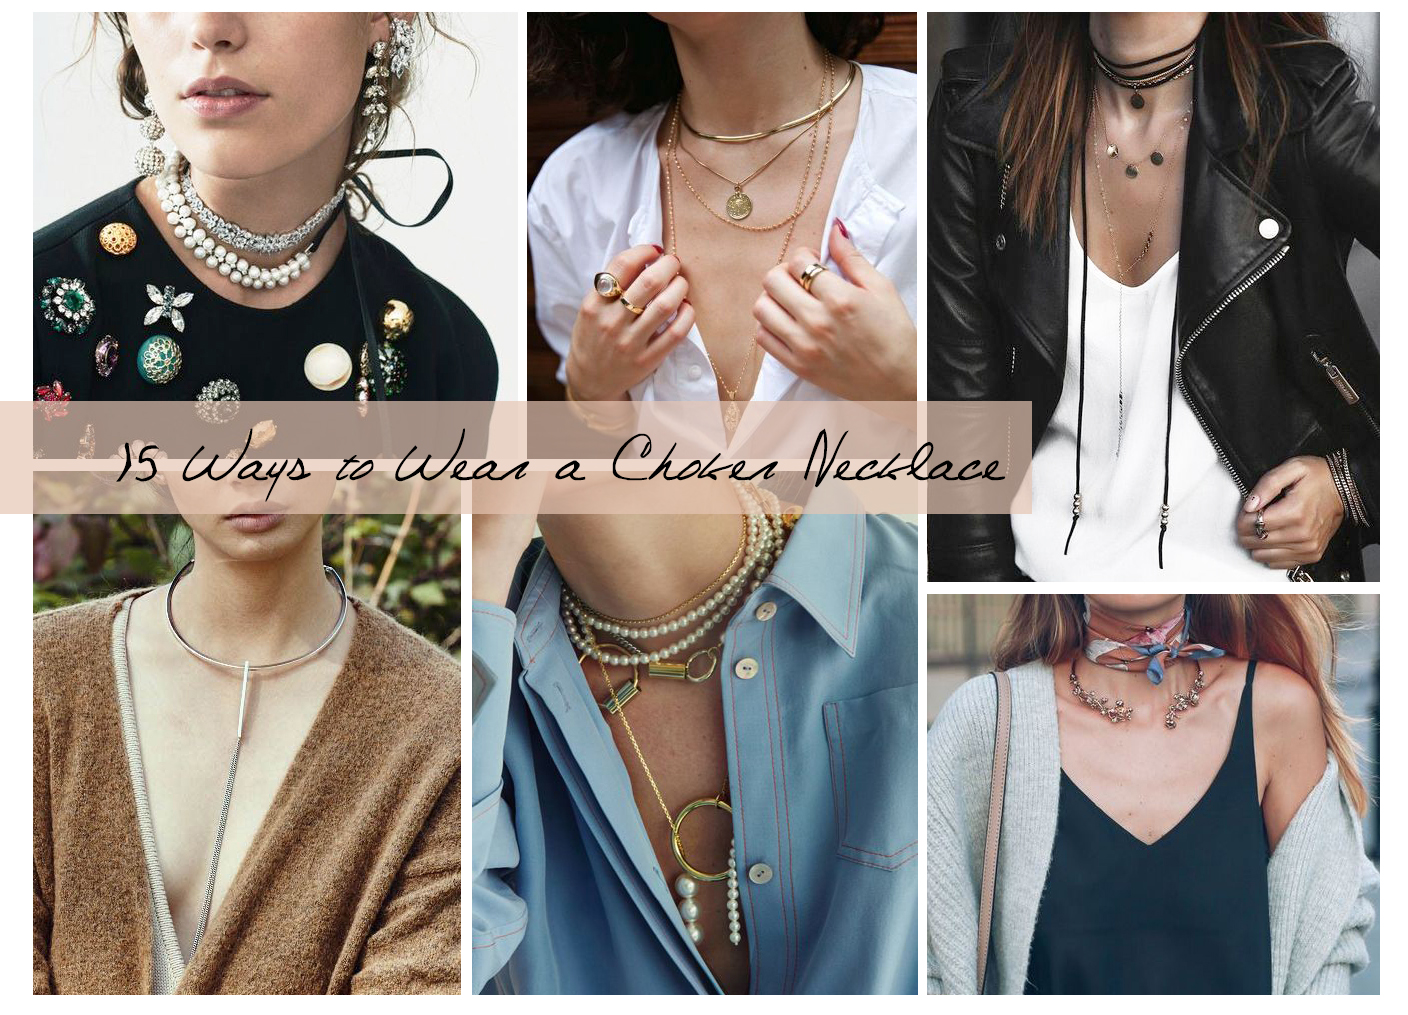 where can i find chokers